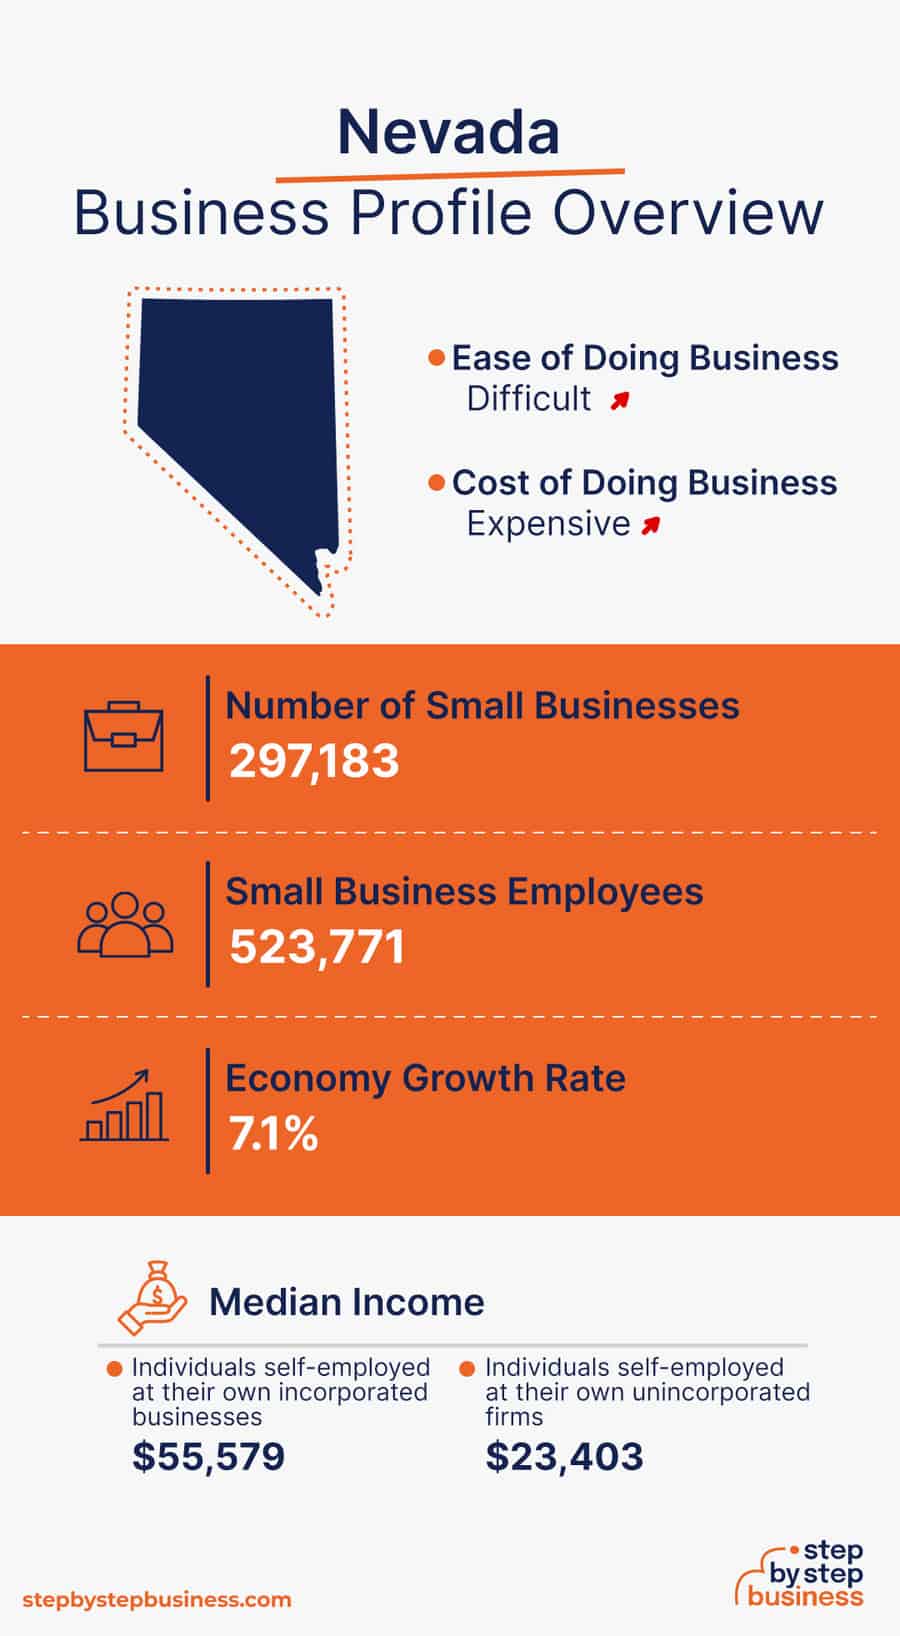 Nevada Business Profile Overview